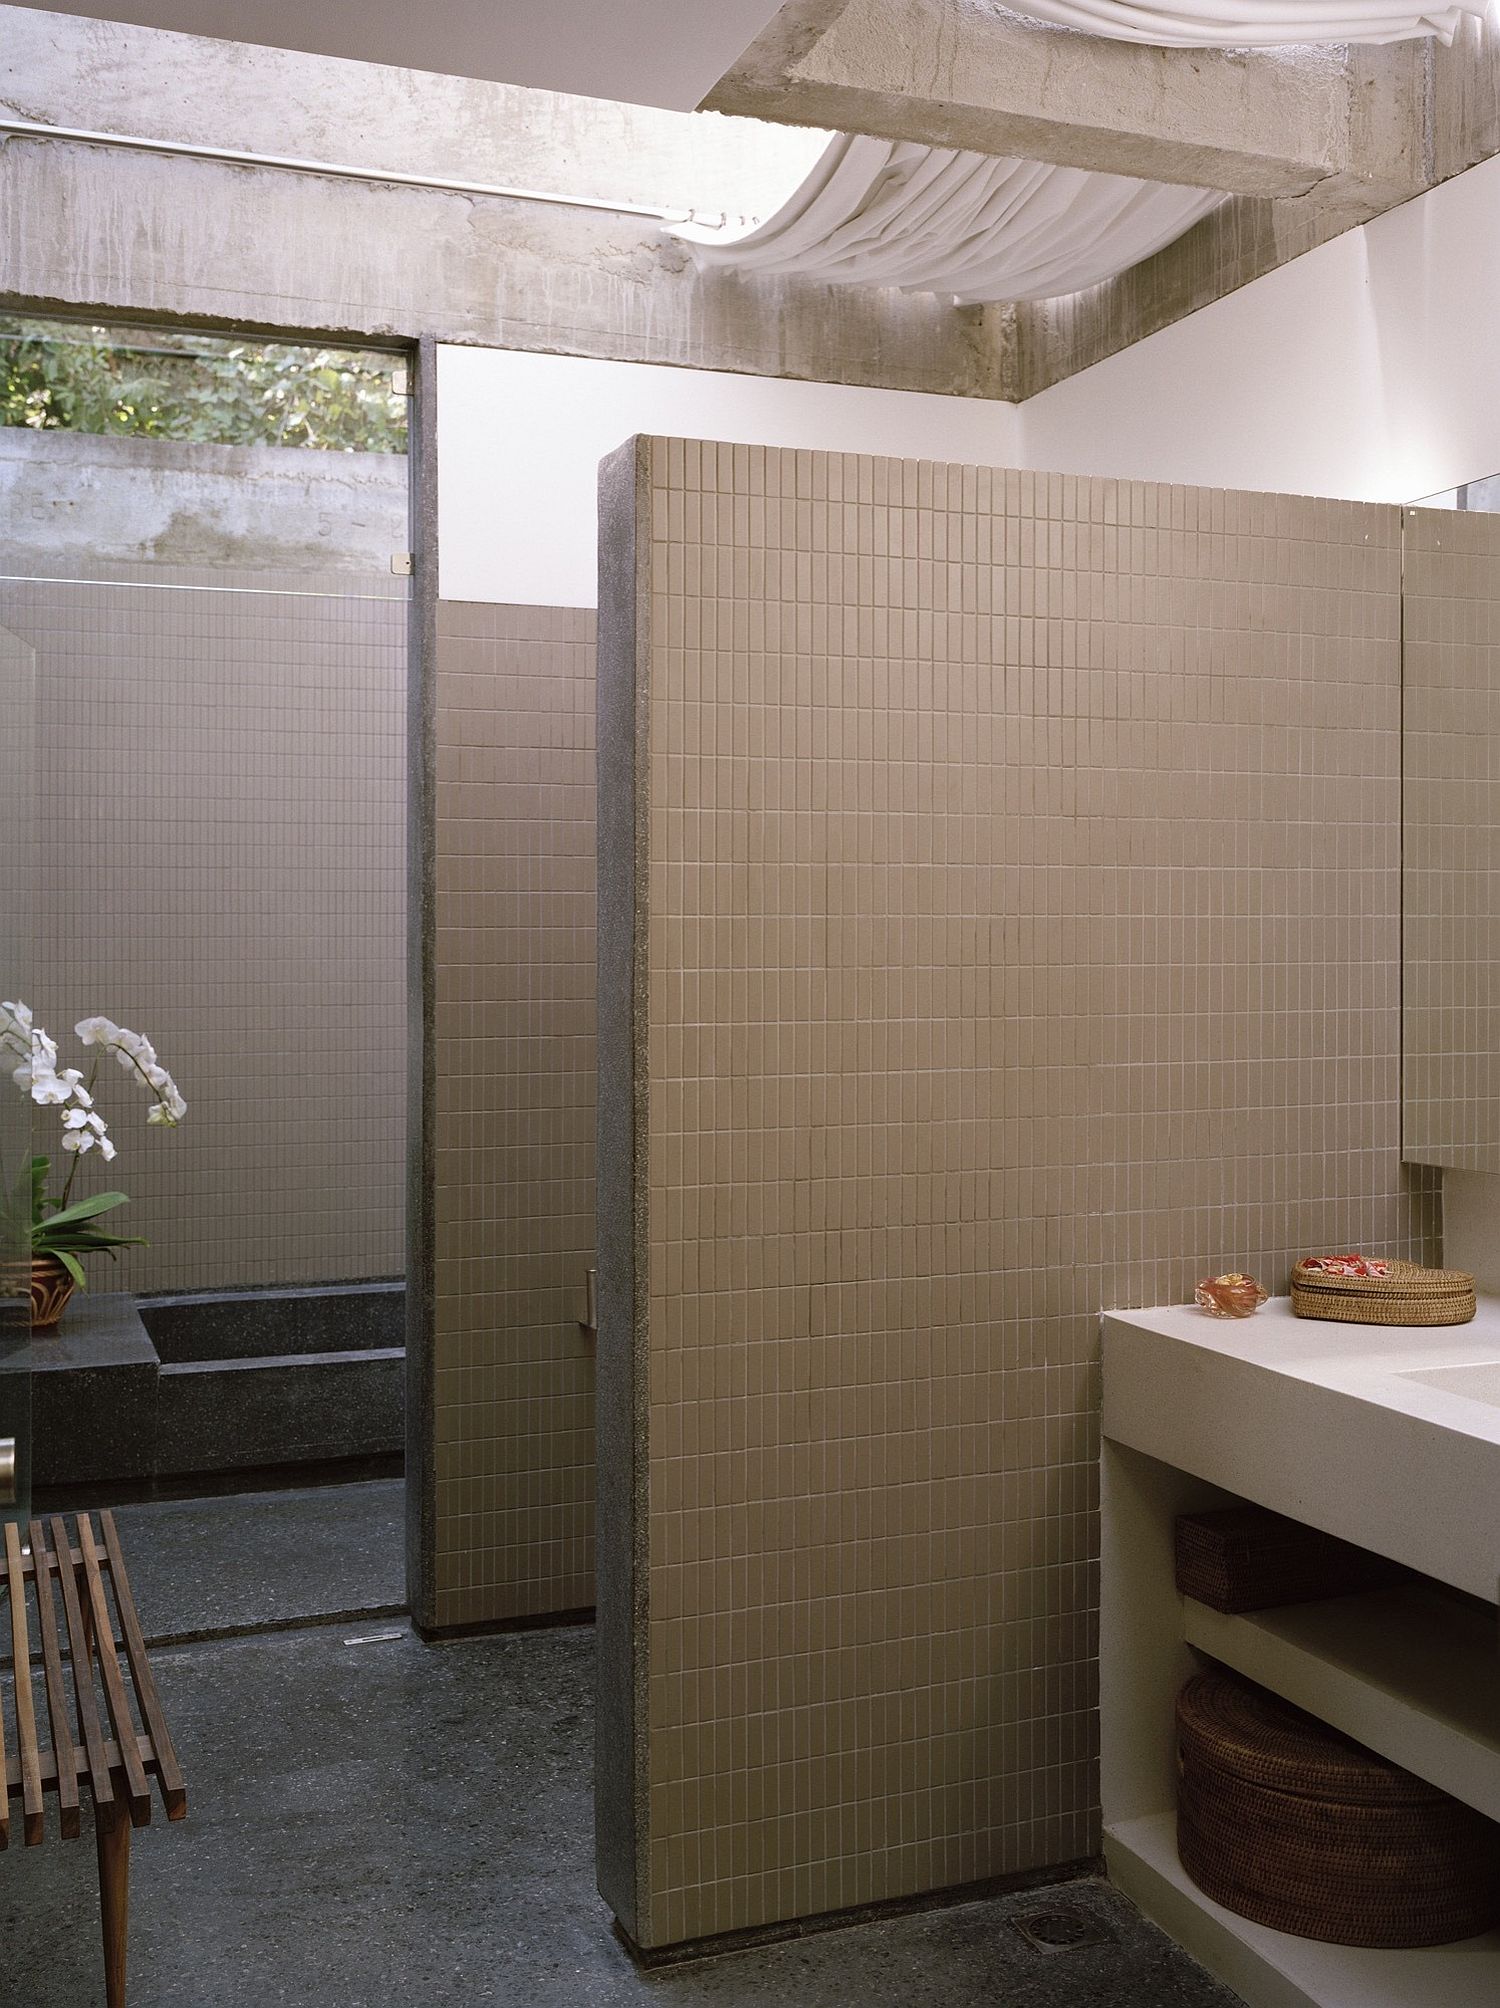 Concrete and tiles bring minimalism to the modern bathroom